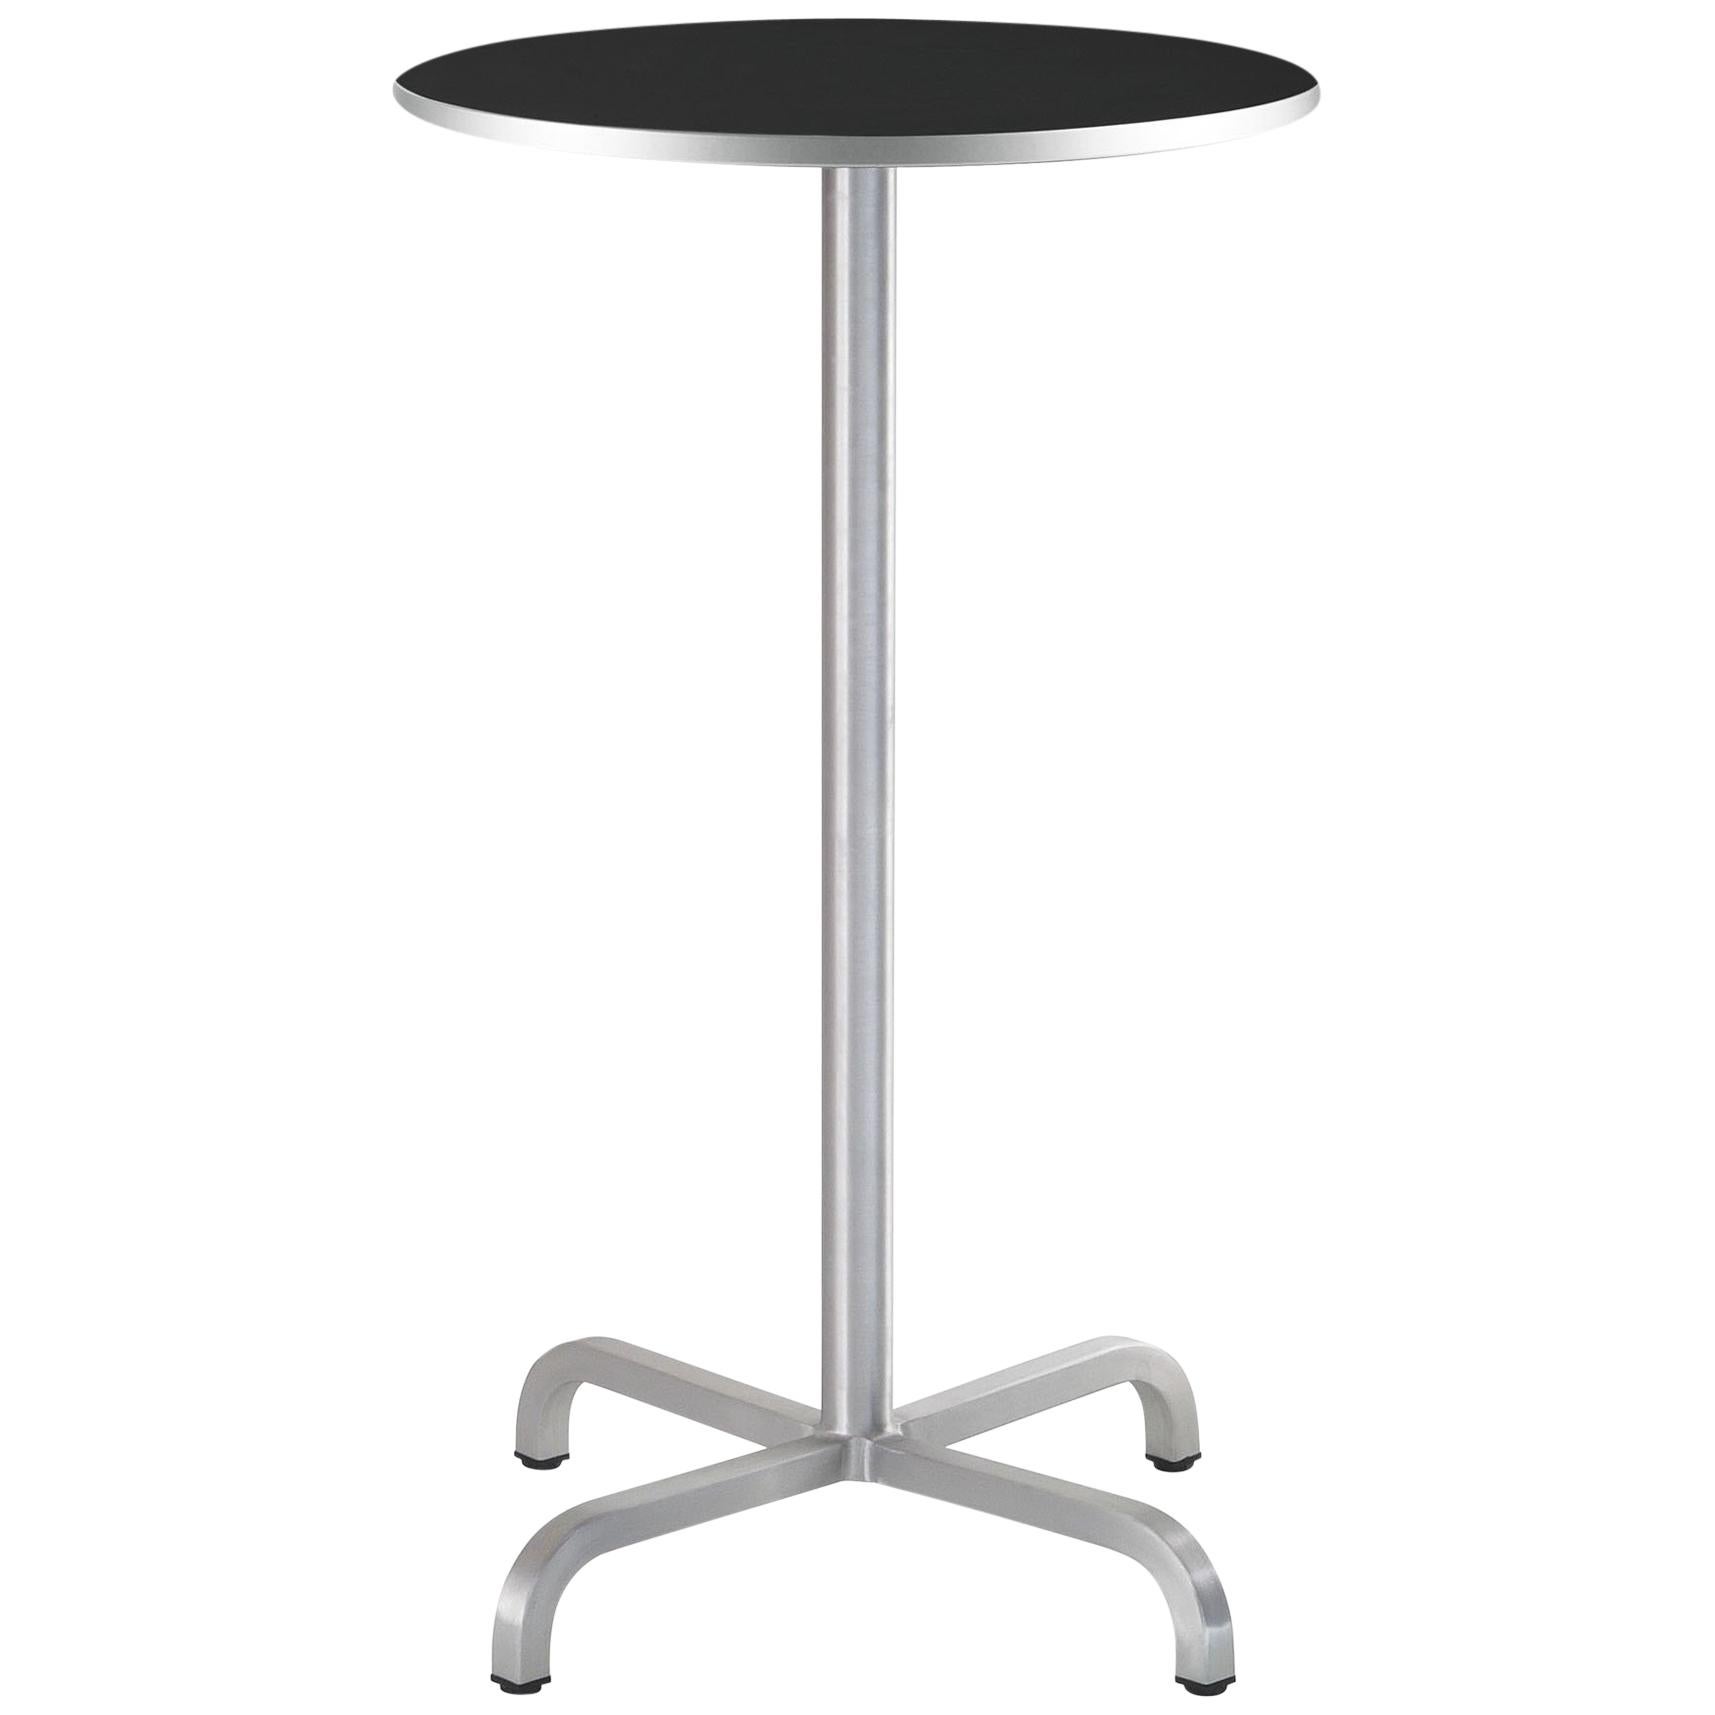 Emeco 20-06 Small Round Bar Table with Black Laminate Top by Norman Foster